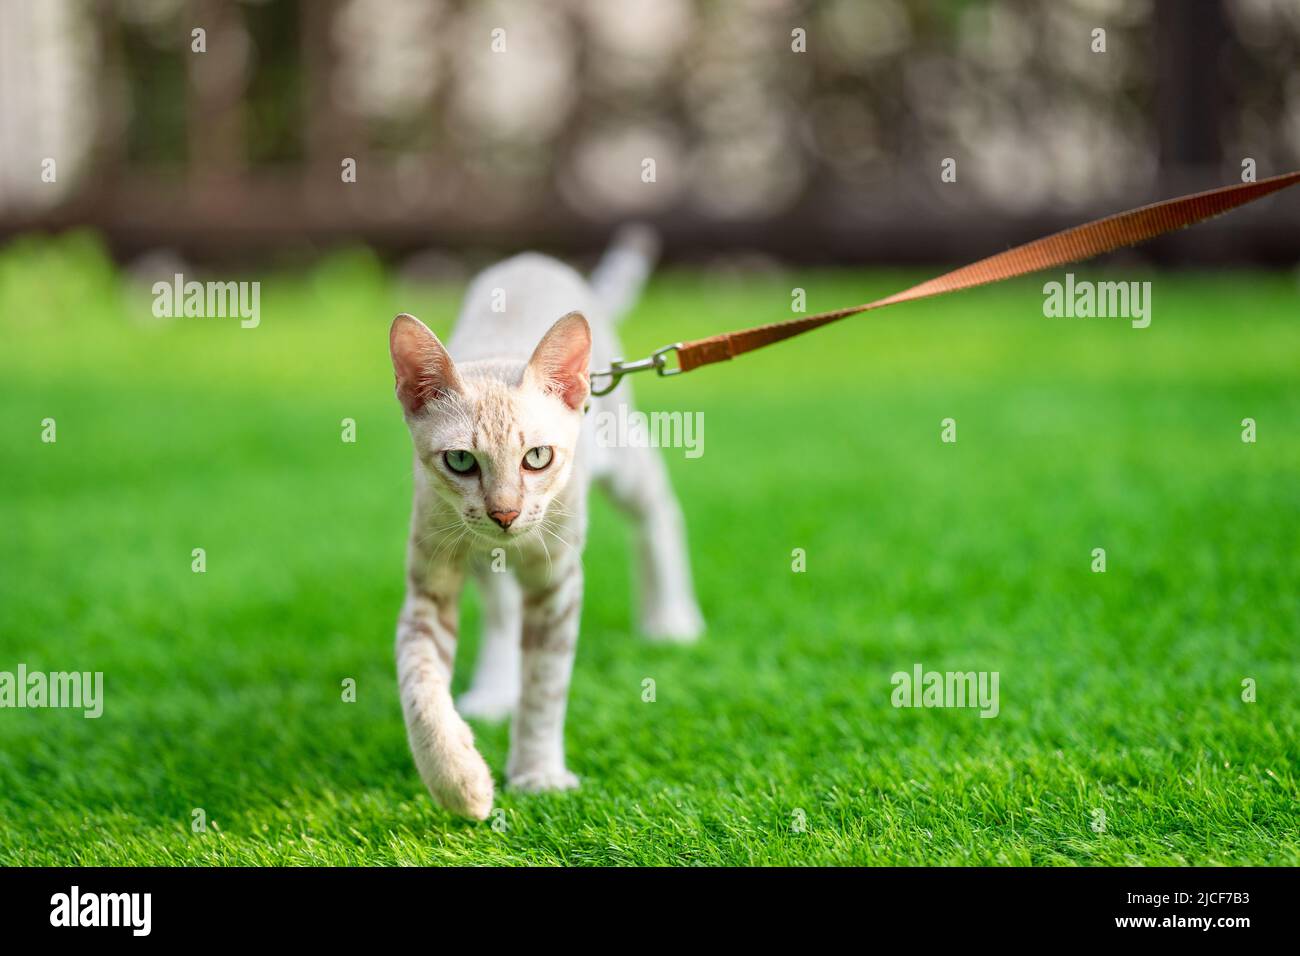 American Shorthair cat with green and blue eyes was taken for a smart walk by its owner in the grassy garden with collar and leash. Stock Photo